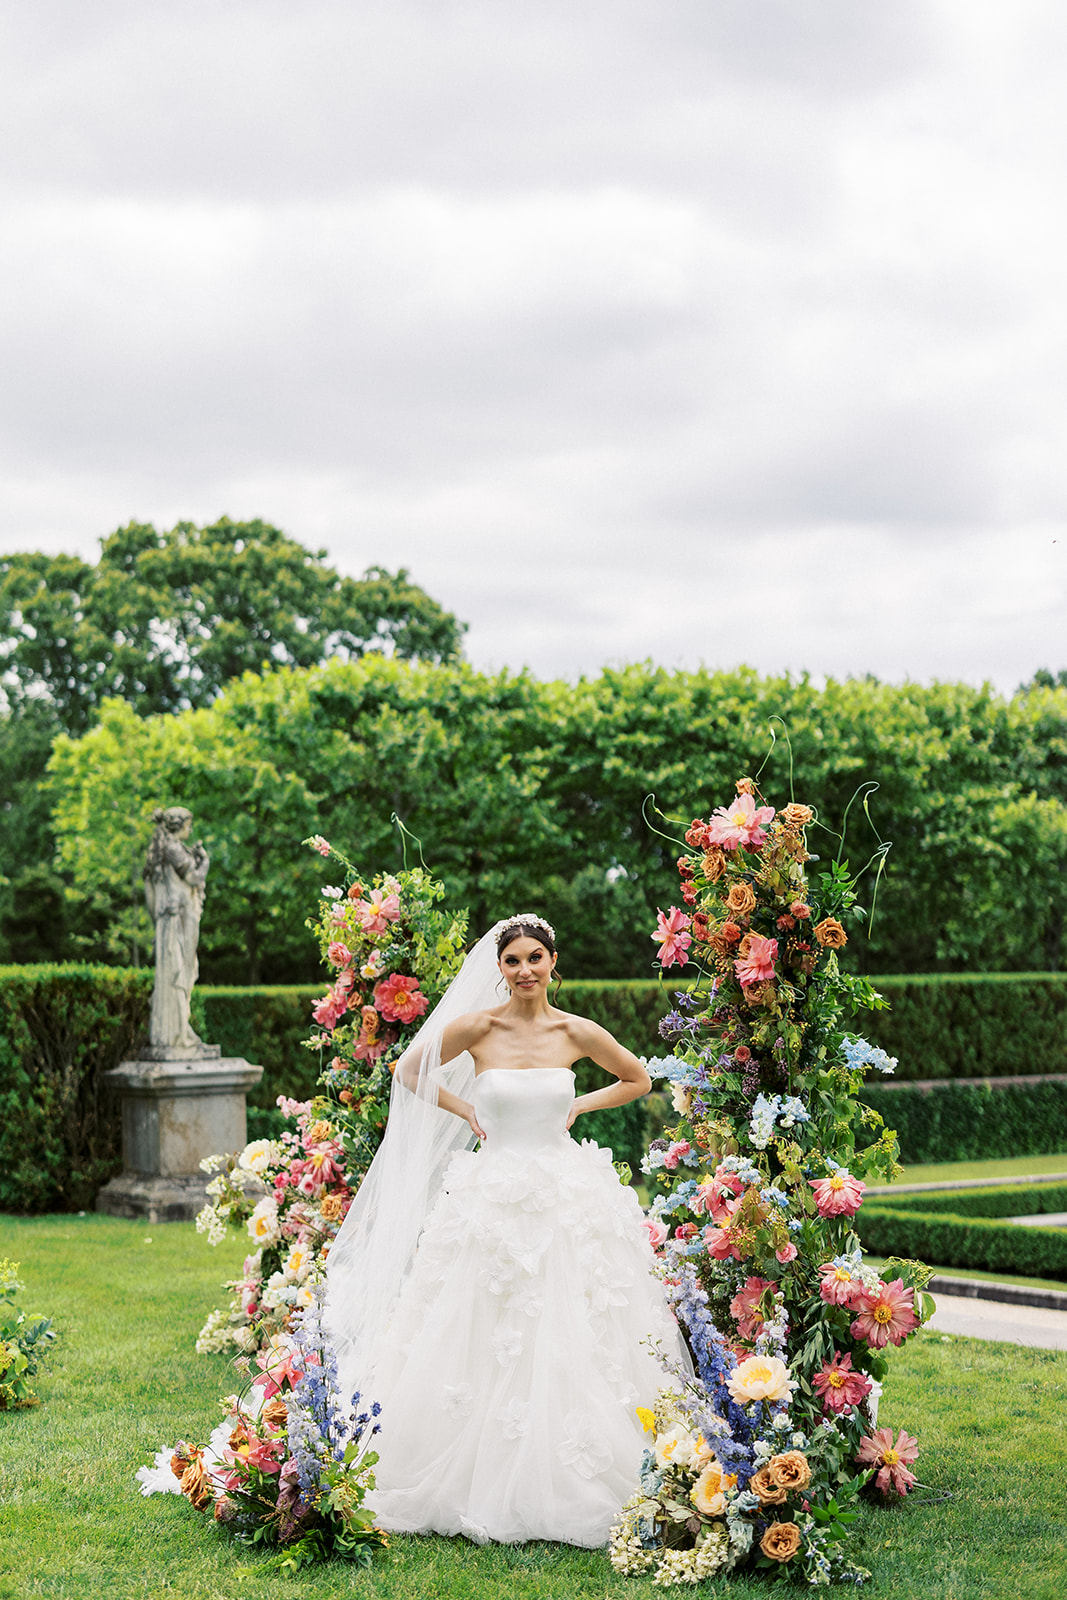 A bride stands amongst a large colorful flower arch with hands on her hips in a garden